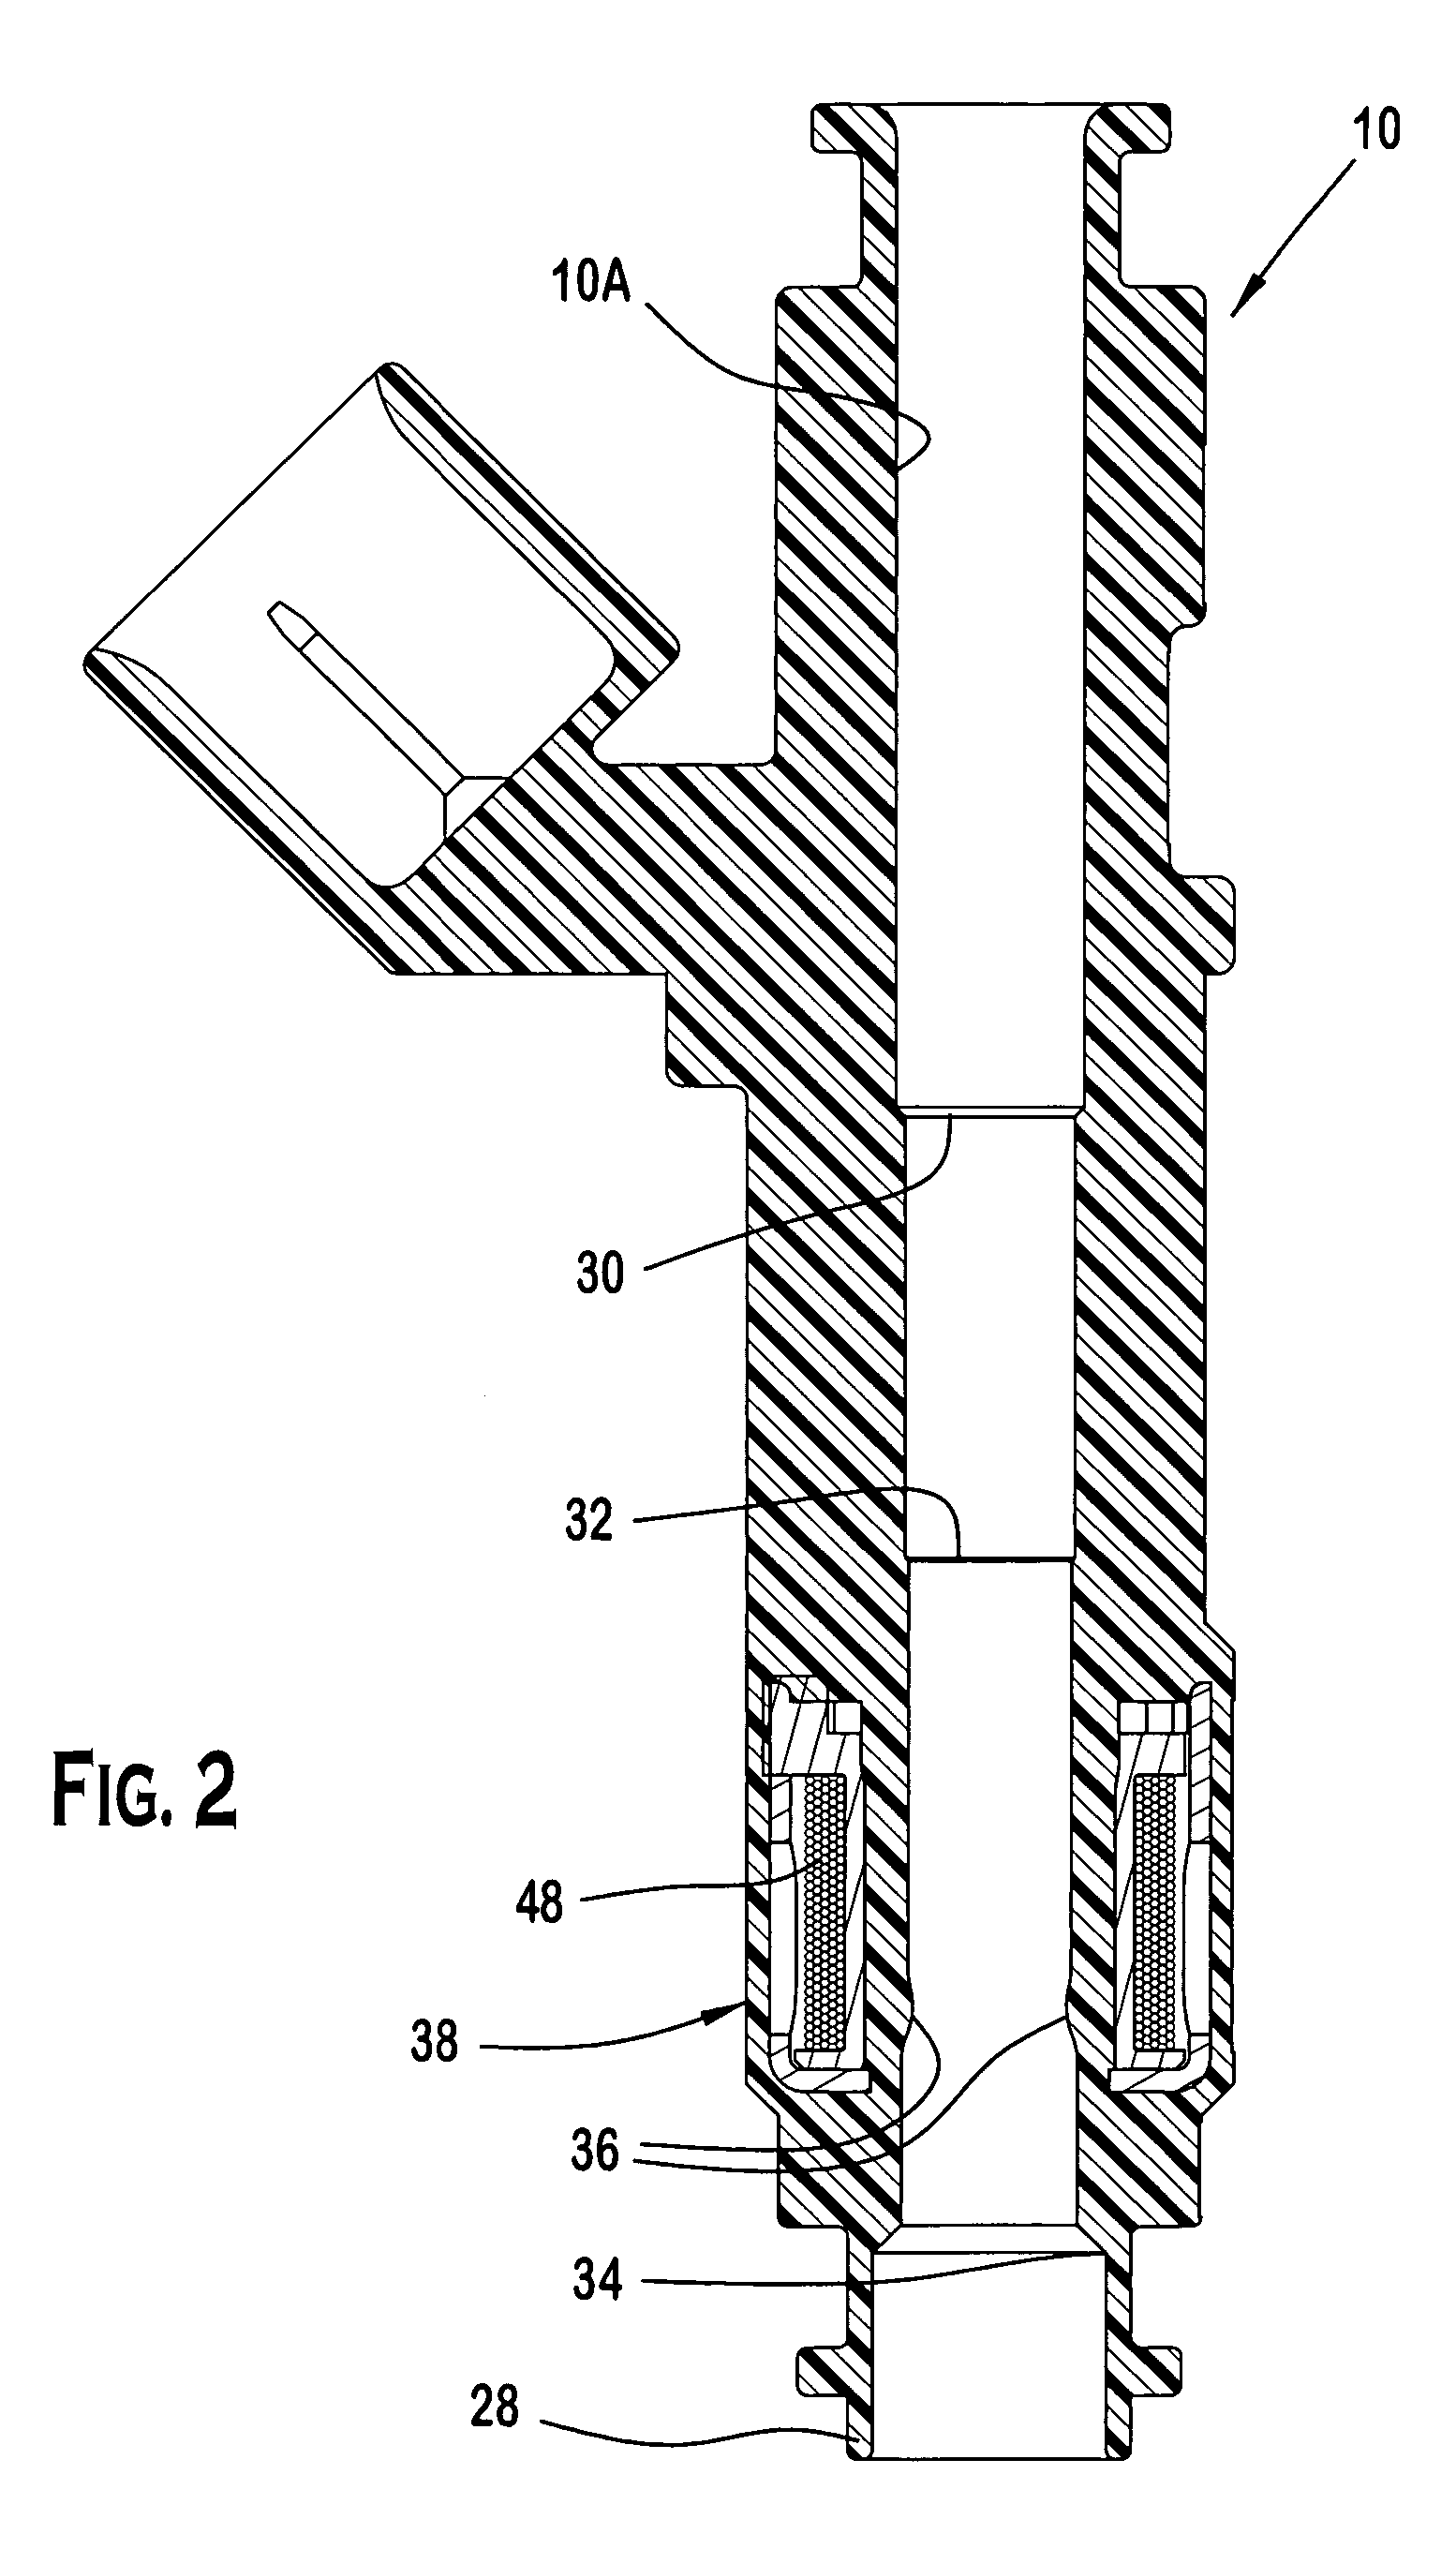 Polymeric bodied fuel injector with a seat and elastomeric seal molded to a polymeric support member